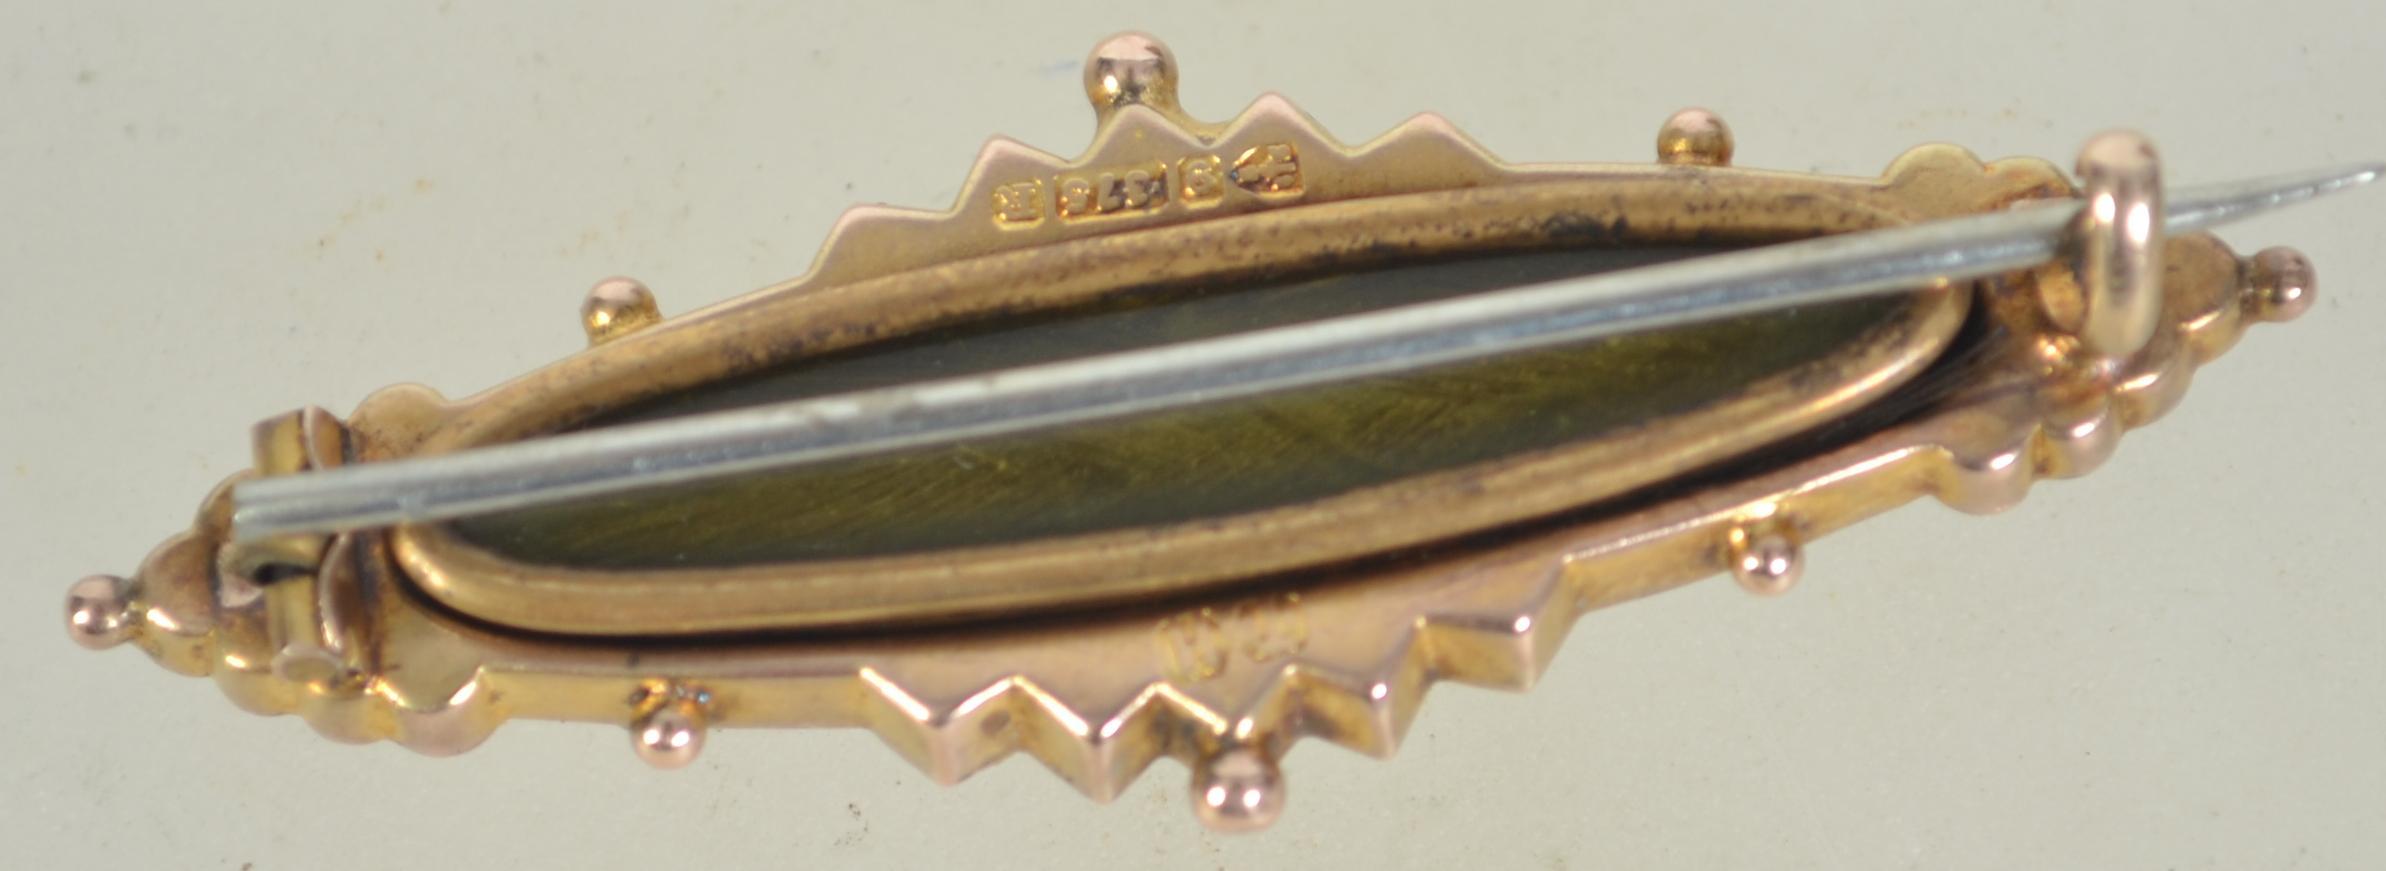 A hallmarked Victorian 9ct gold / 375 Chester hallmarked bar and filigree brooch with inset central - Image 2 of 2